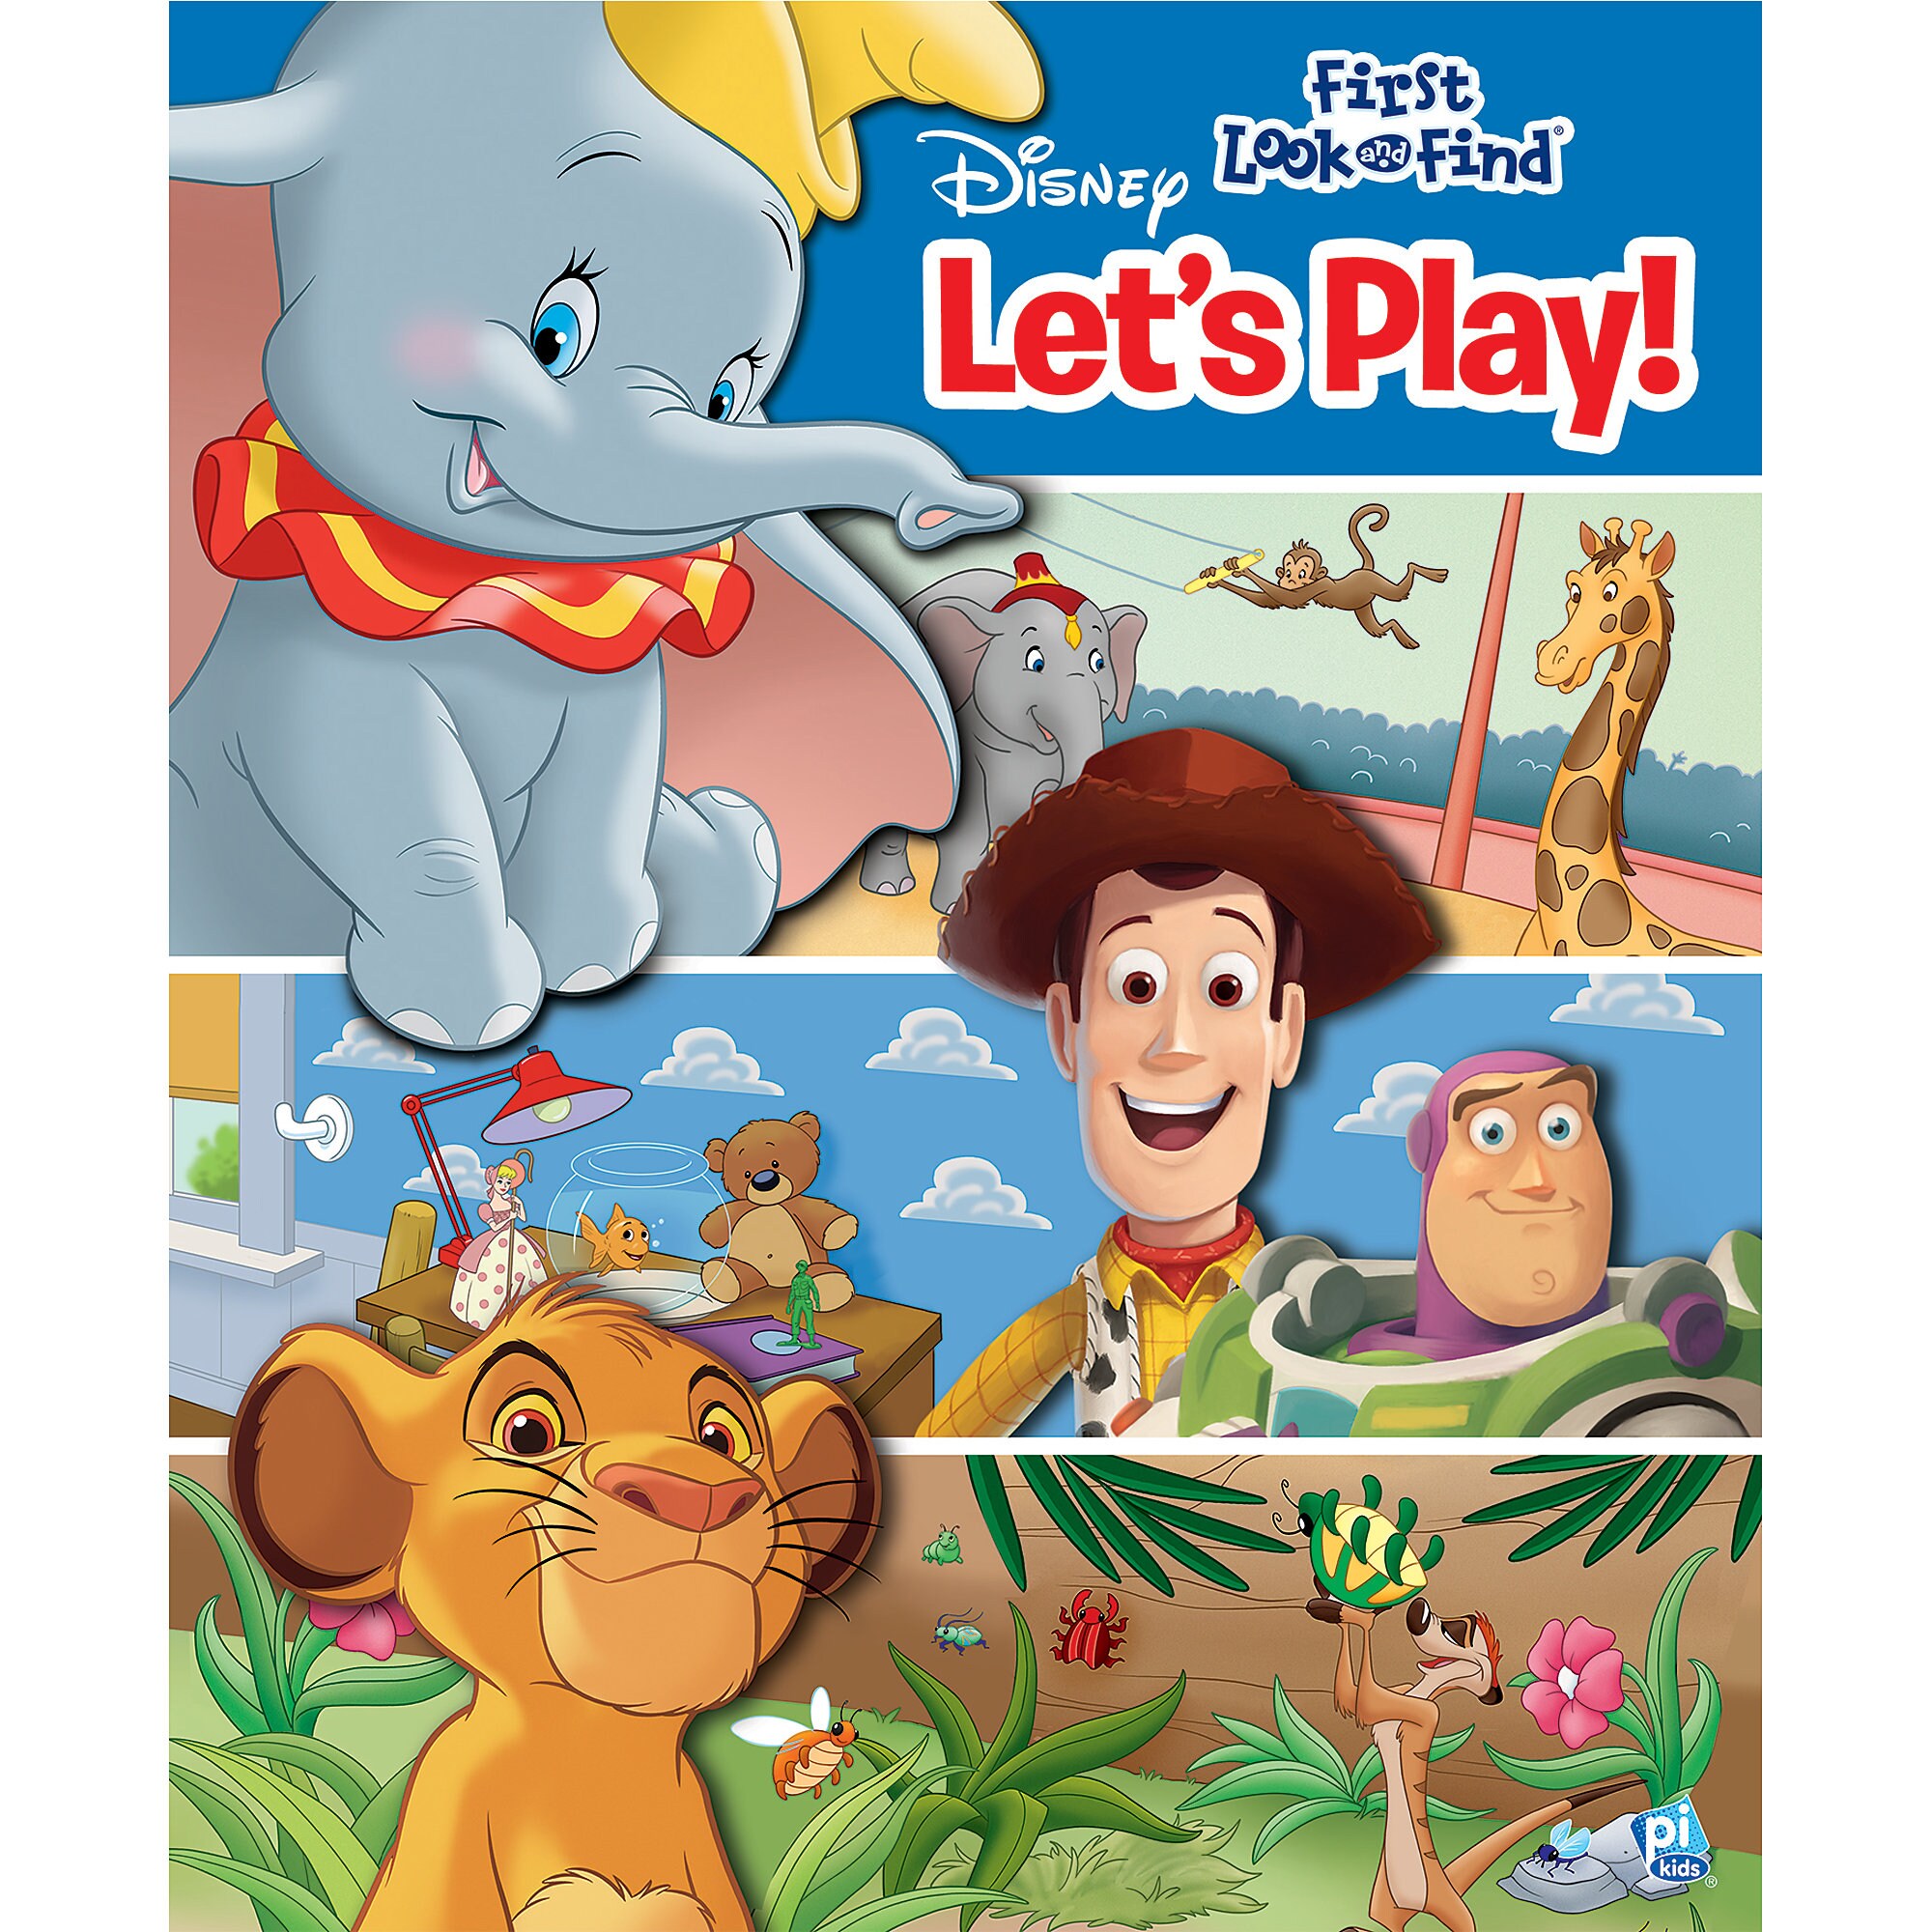 Disney Let's Play! First Look and Find Book